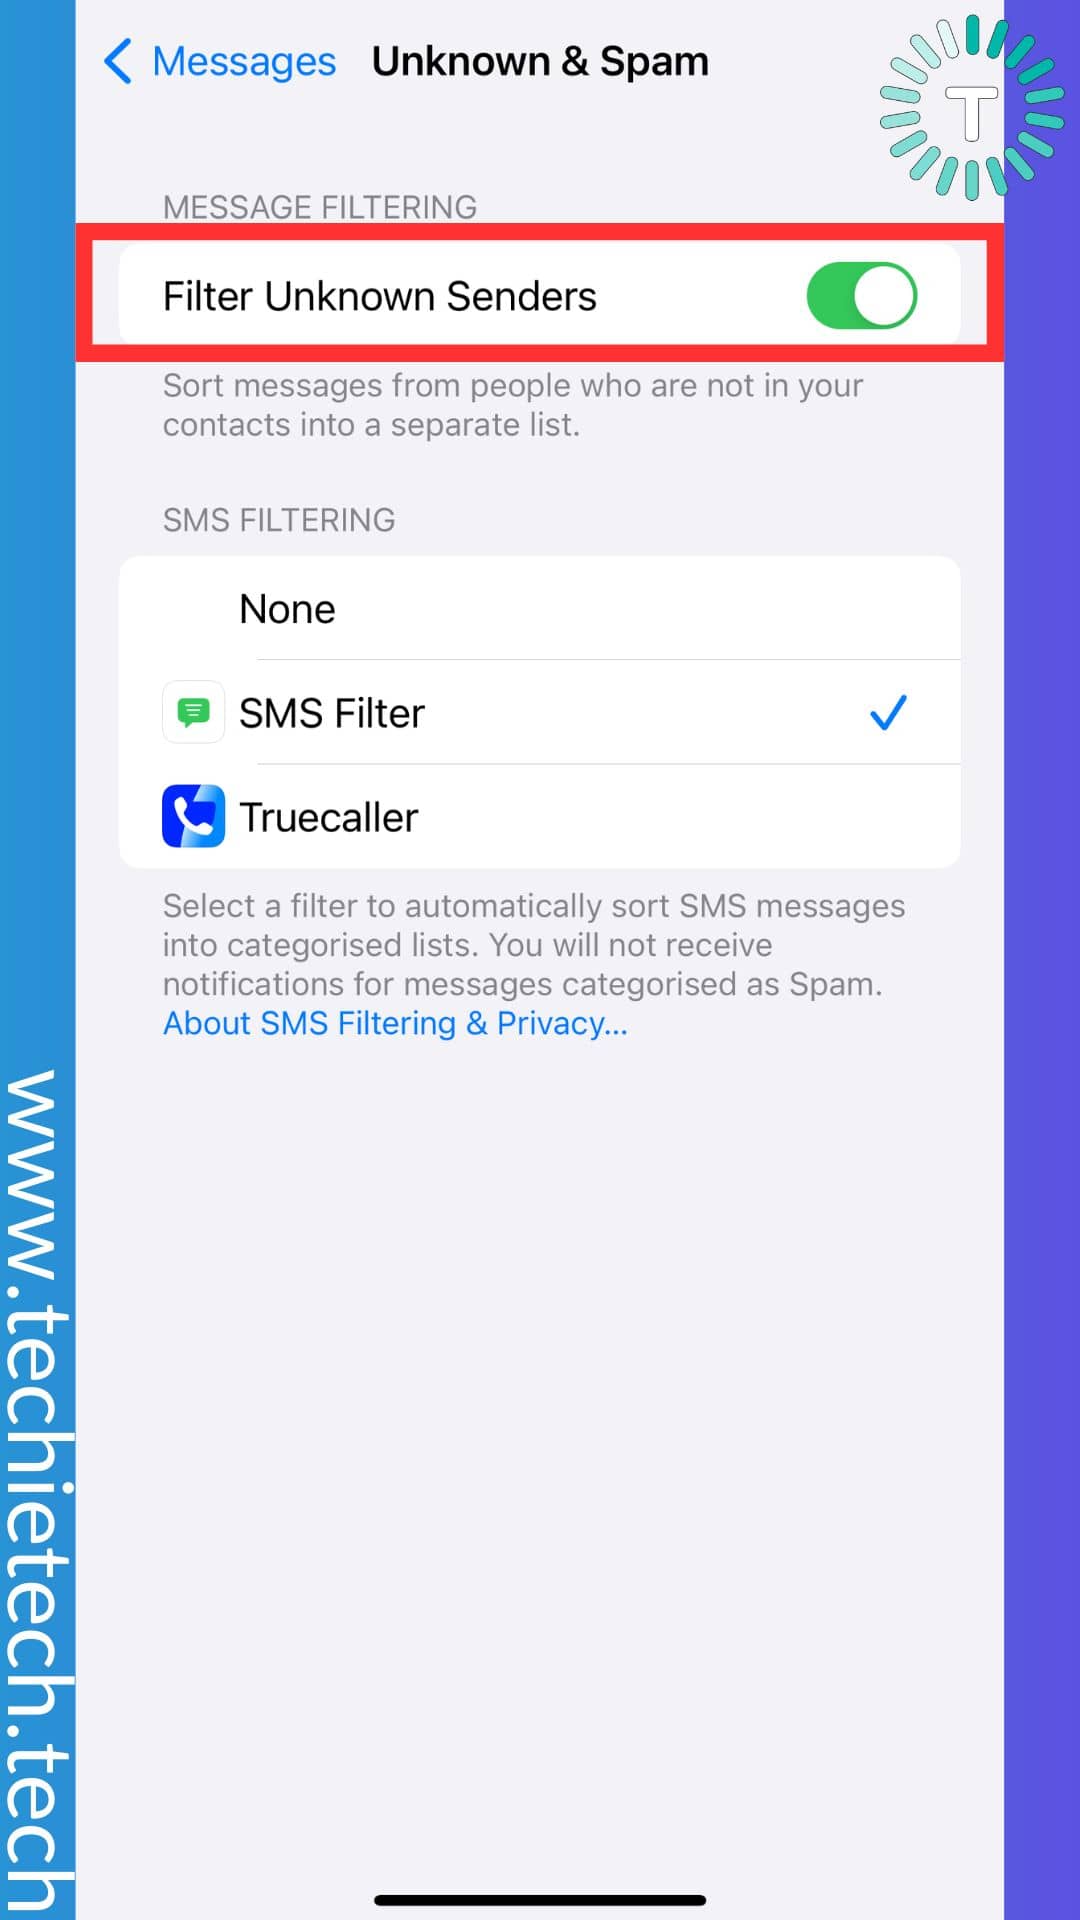 Toggle off Filter Unknow Senders